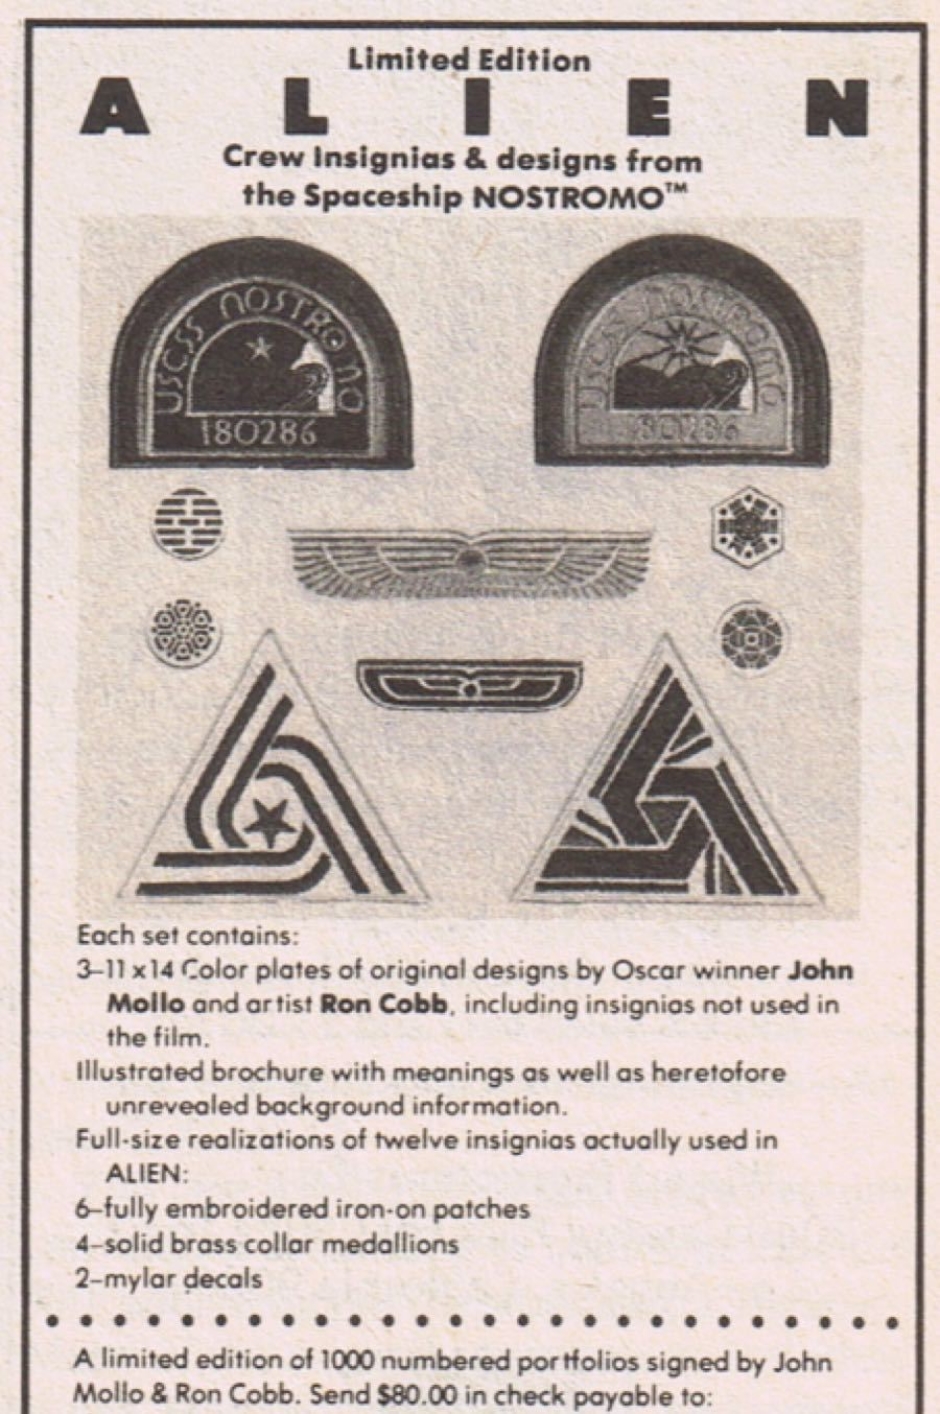 <p><strong>Figure 5.7</strong> An Authorized Portfolio of Crew Insignias was also available from The Thinking Cap Co. Source: <em>Starlog Magazine</em>, June 1980.</p>